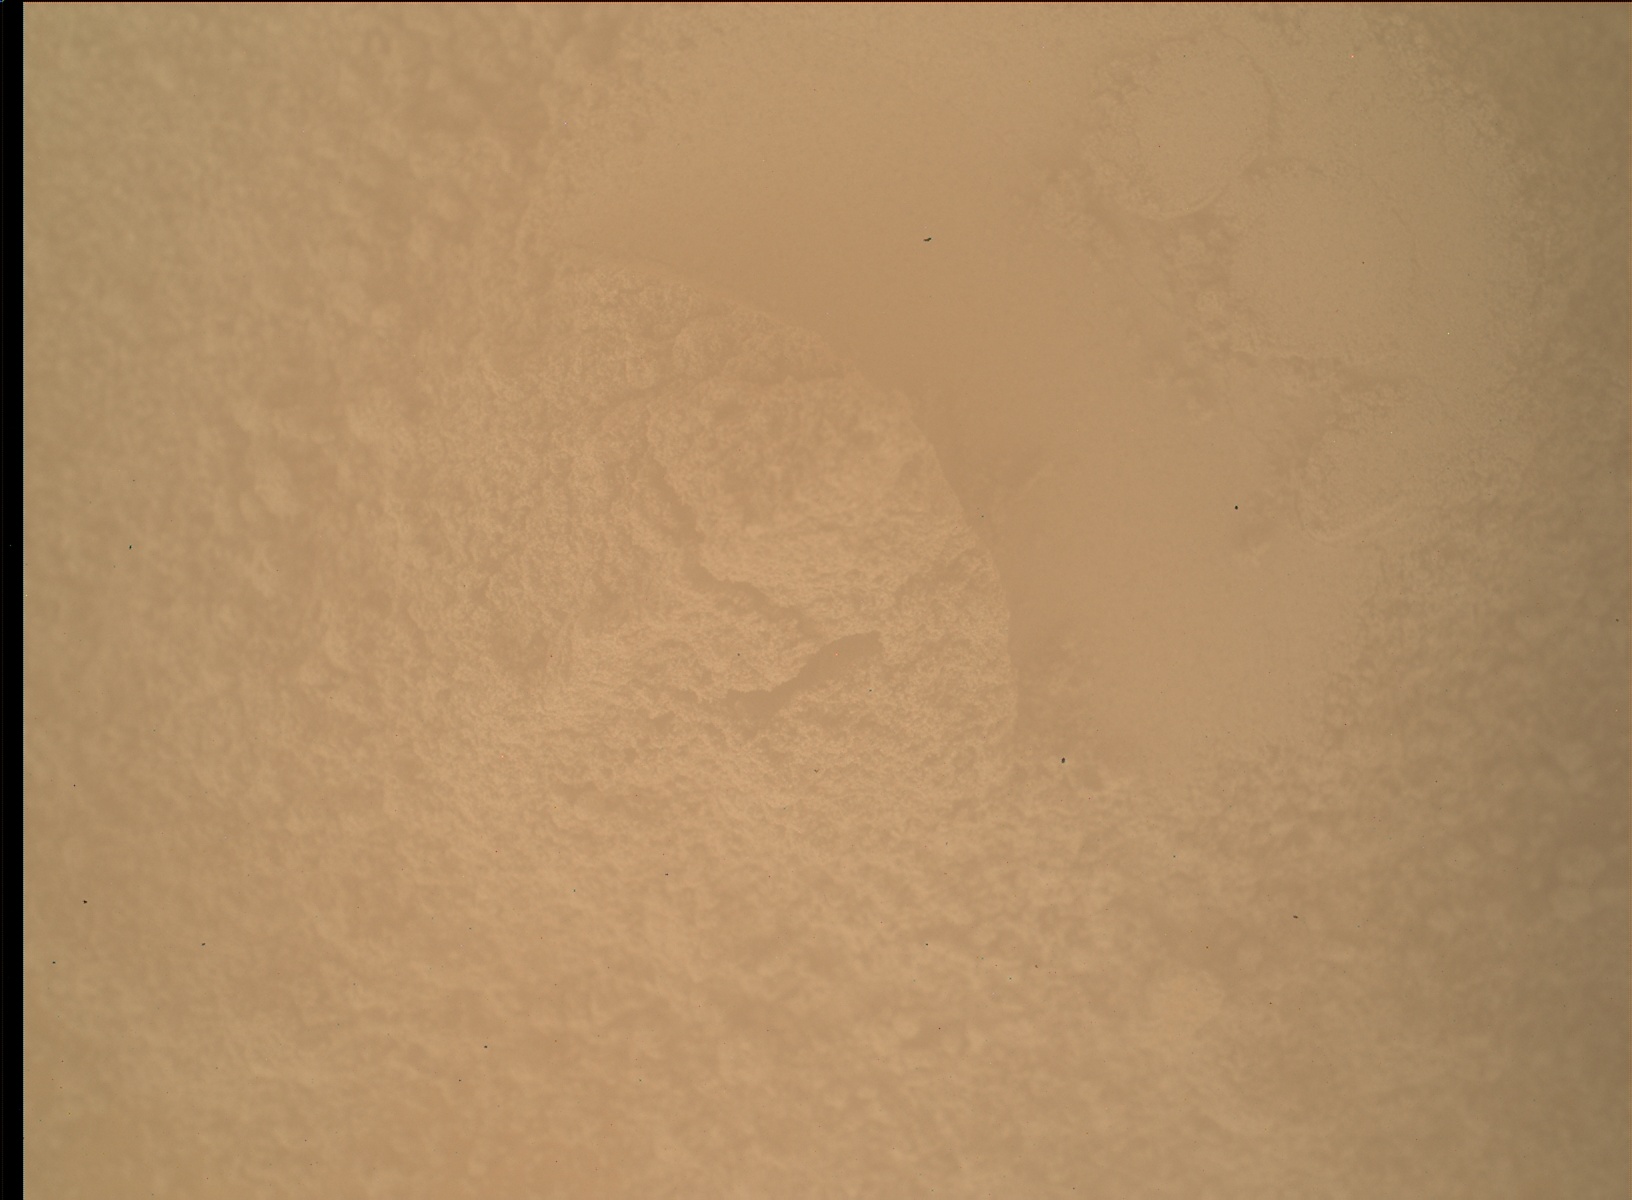 Nasa's Mars rover Curiosity acquired this image using its Mars Hand Lens Imager (MAHLI) on Sol 1203